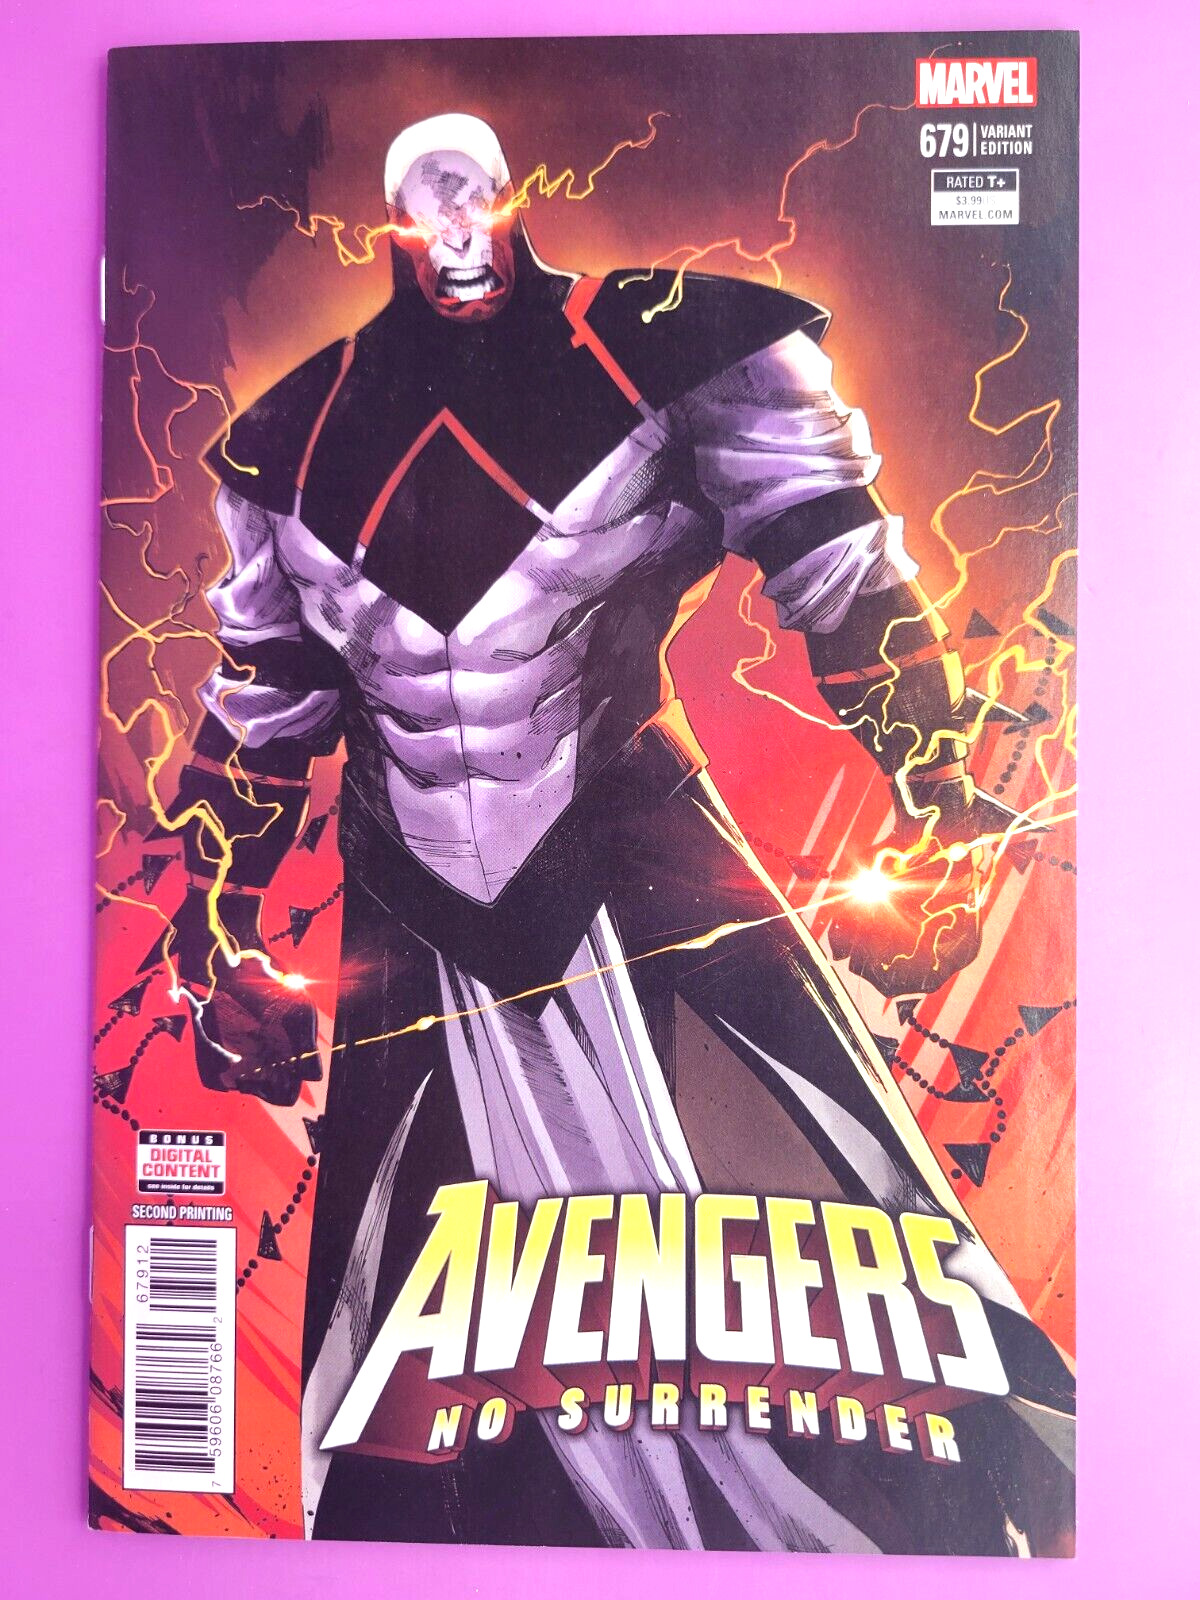 AVENGERS  #679  2ND PRINT  VARIANT     VF/NM   COMBINE SHIPPING BX2495  I24